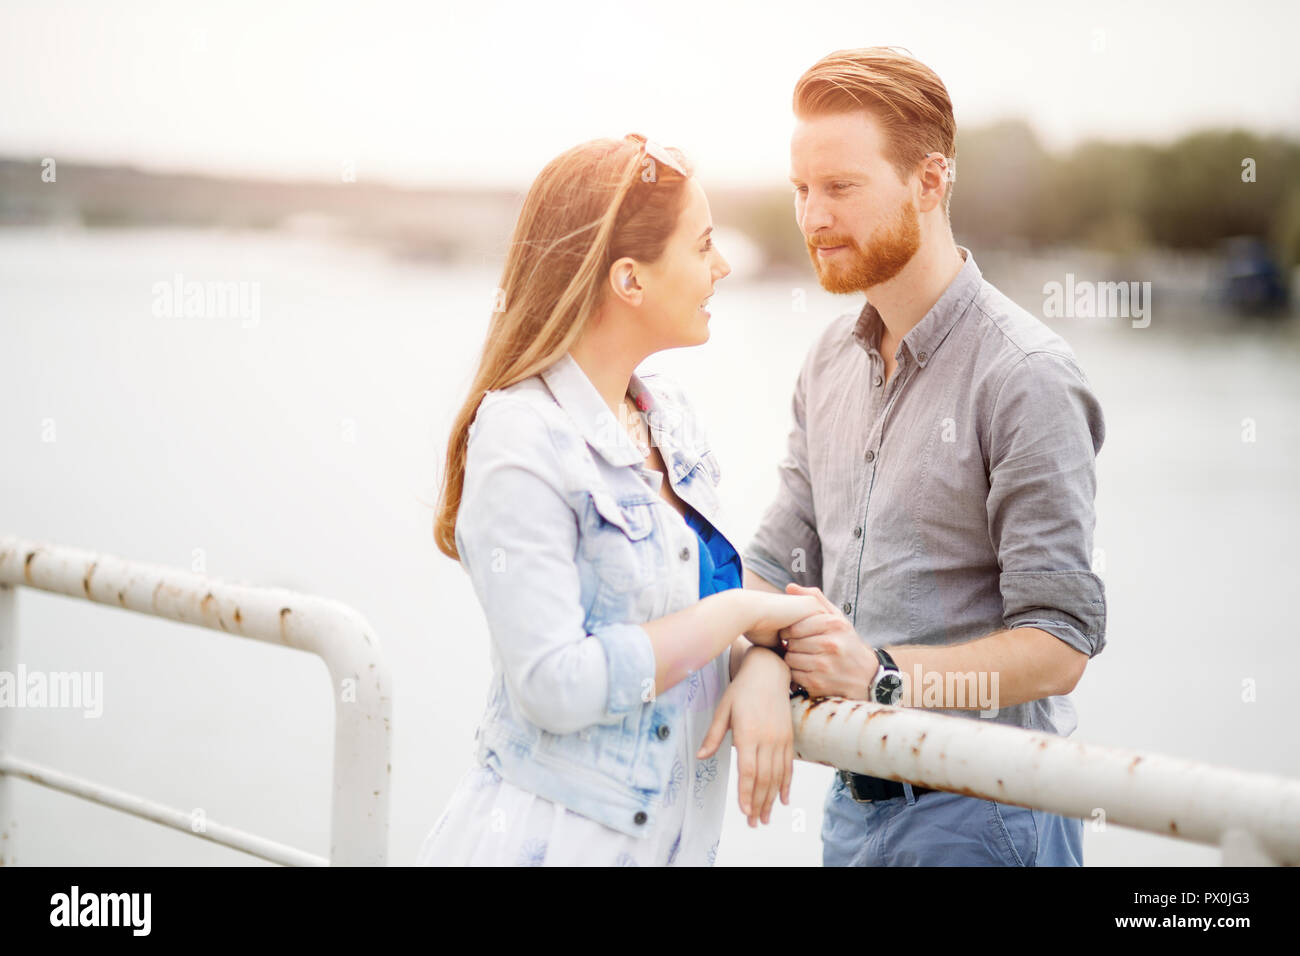 Cute couple enjoying time spent together outdoors Stock Photo